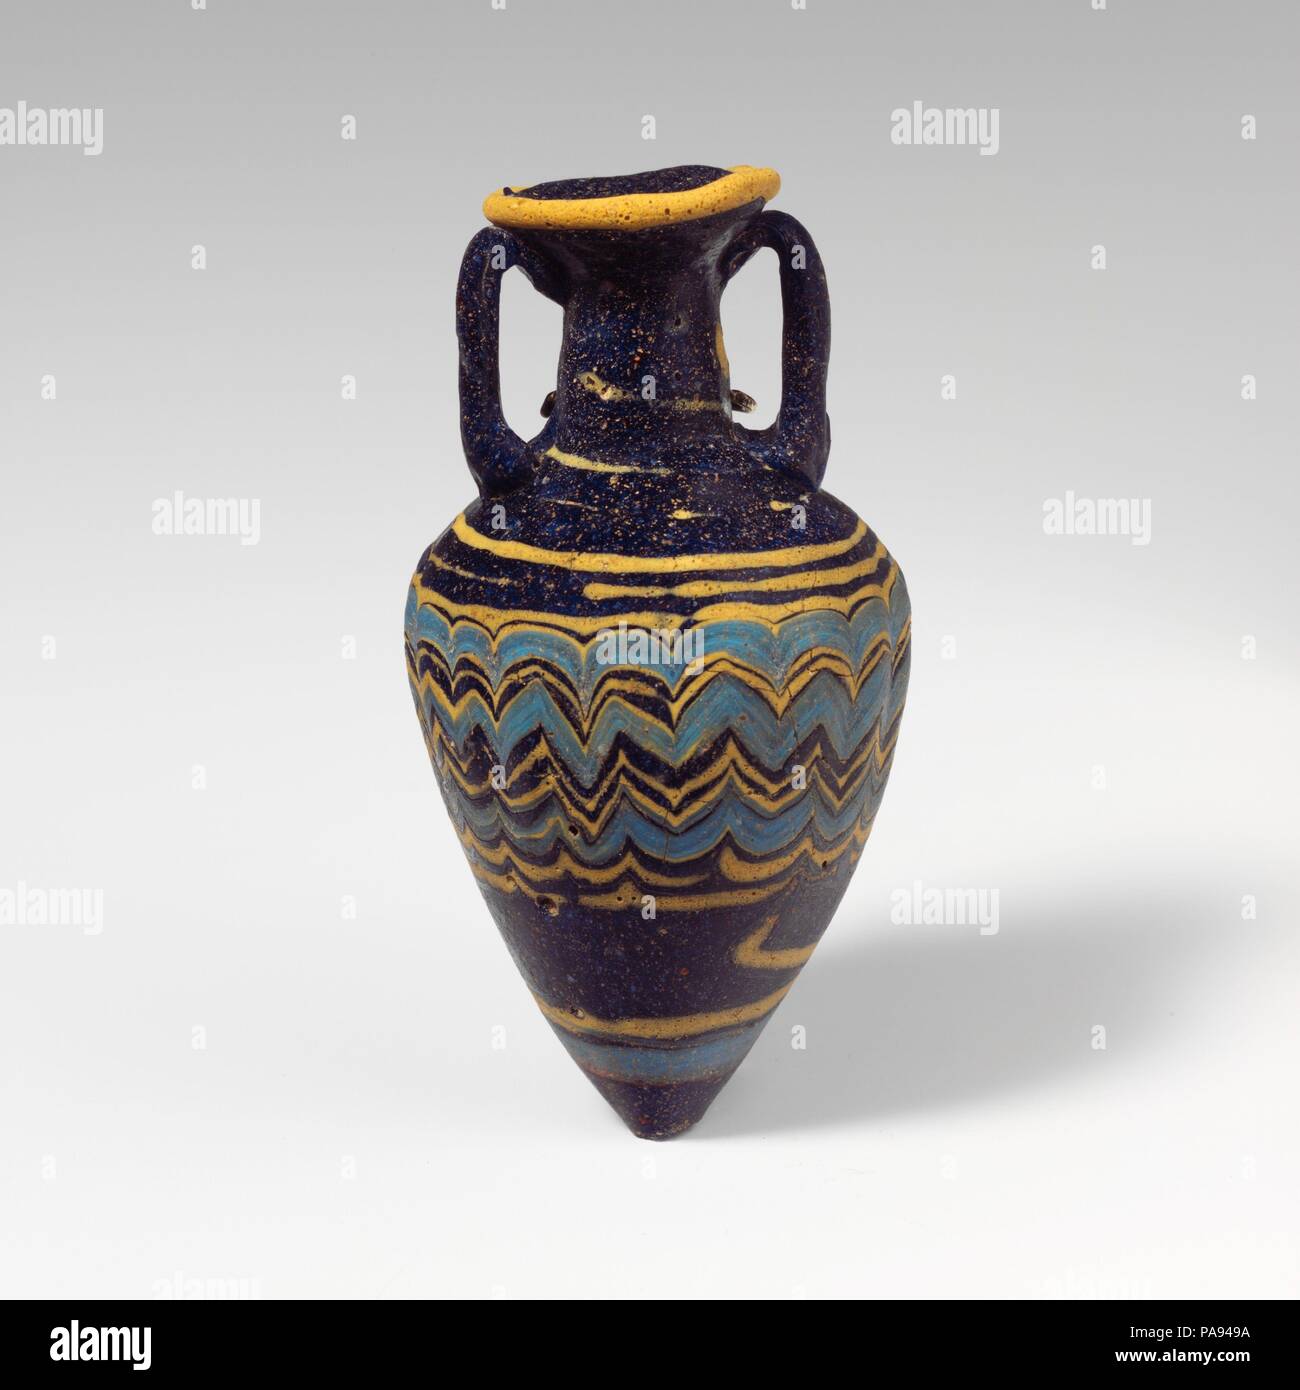 Glass amphoriskos (perfume bottle). Culture: Greek, Eastern Mediterranean. Dimensions: H. 3 9/16 in. (9 cm). Date: late 6th-5th century B.C..  Translucent dark cobalt blue, with handles in same color; trails in opaque yellow and opaque turquoise blue.  Broad inward-sloping rim-disk; cylindrical neck, expanding slightly downwards; broad, angular shoulder; tall conical body, tapering downwards to pointed bottom; two vertical strap handles applied to top of shoulder, drawn up, and pressed onto underside of rim-disk.  One yellow trail attached at edge of rim-disk; another yellow trail applied to n Stock Photo